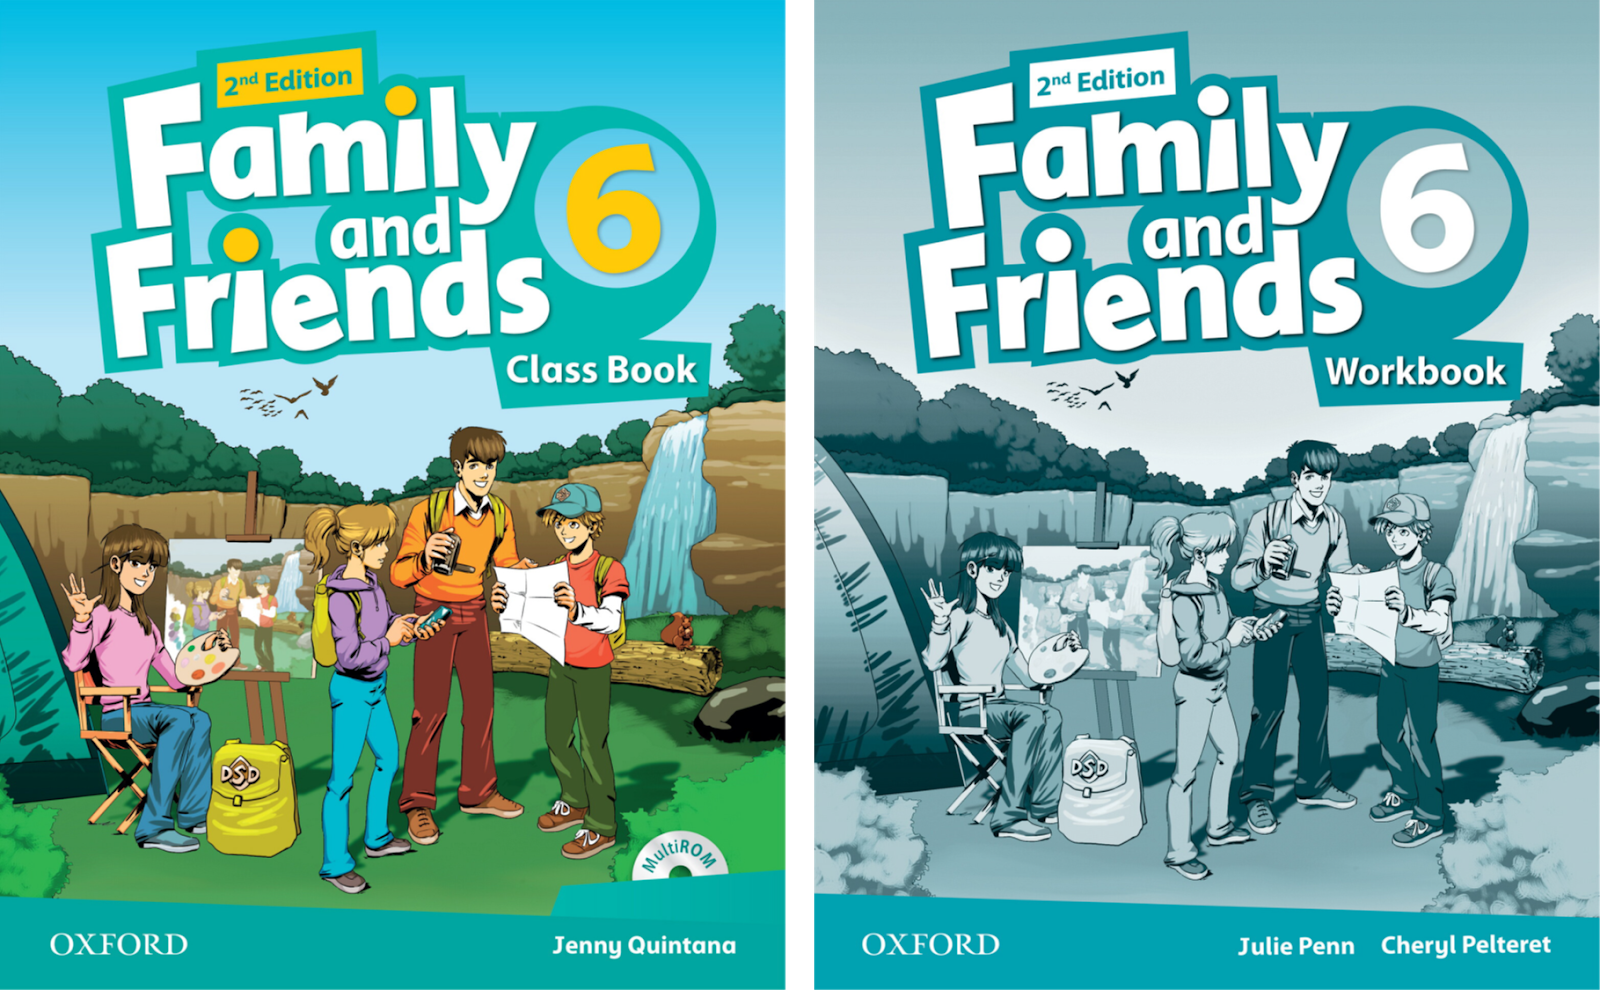 Books and friends. Family and friends 2 первое издание. Family and friends 2 2nd Edition Classbook. Family and friends (2nd Edition) 1 class book. \Фэмили энд френдс 2 издание.